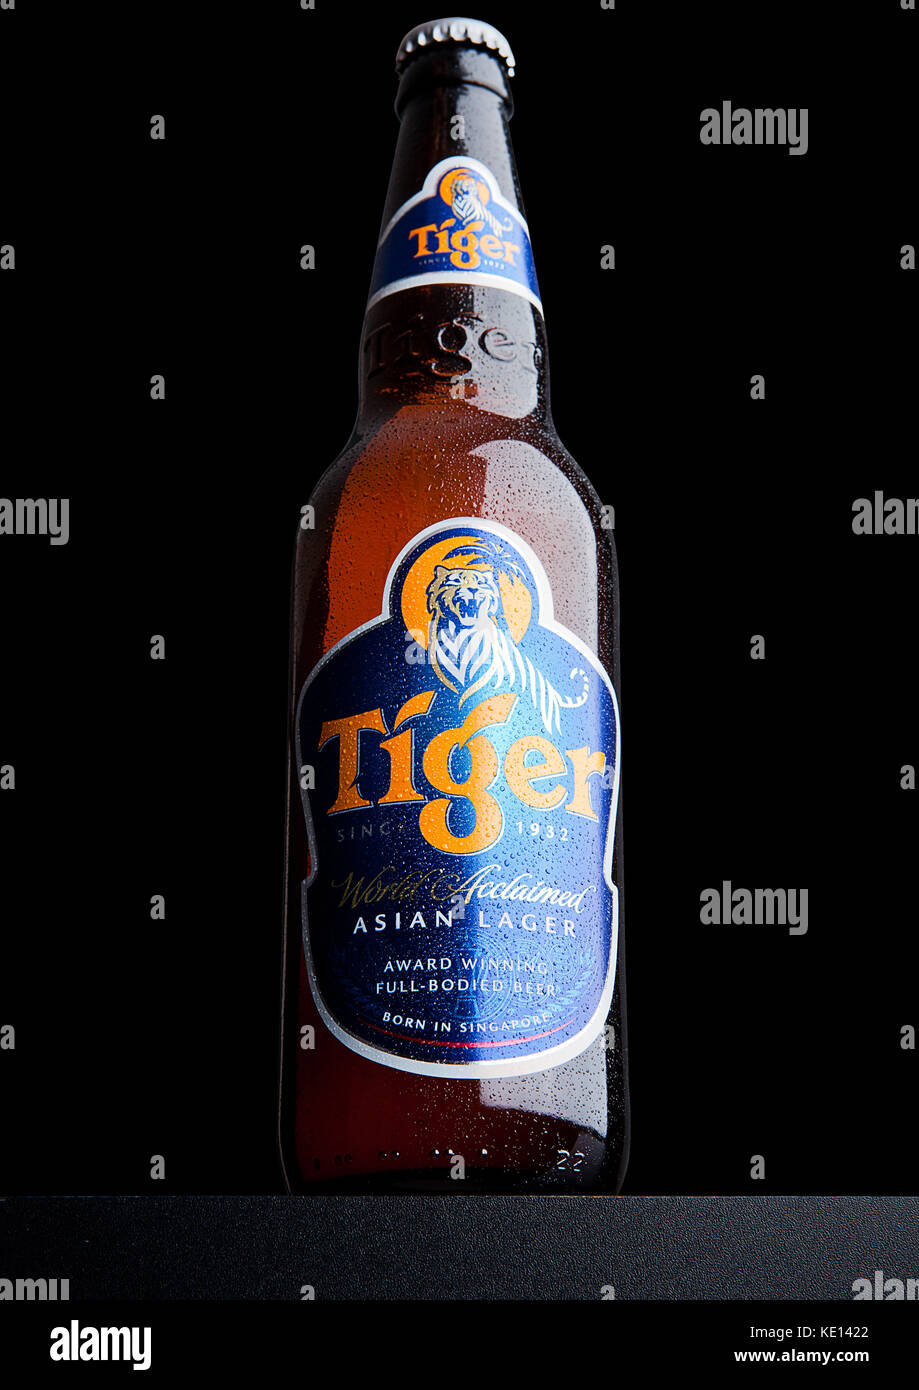 LONDON, UK, DECEMBER 15, 2016: Bottle of Tiger Beer on black background, First launched in 1932 is Singapore's first brewed beer. Stock Photo